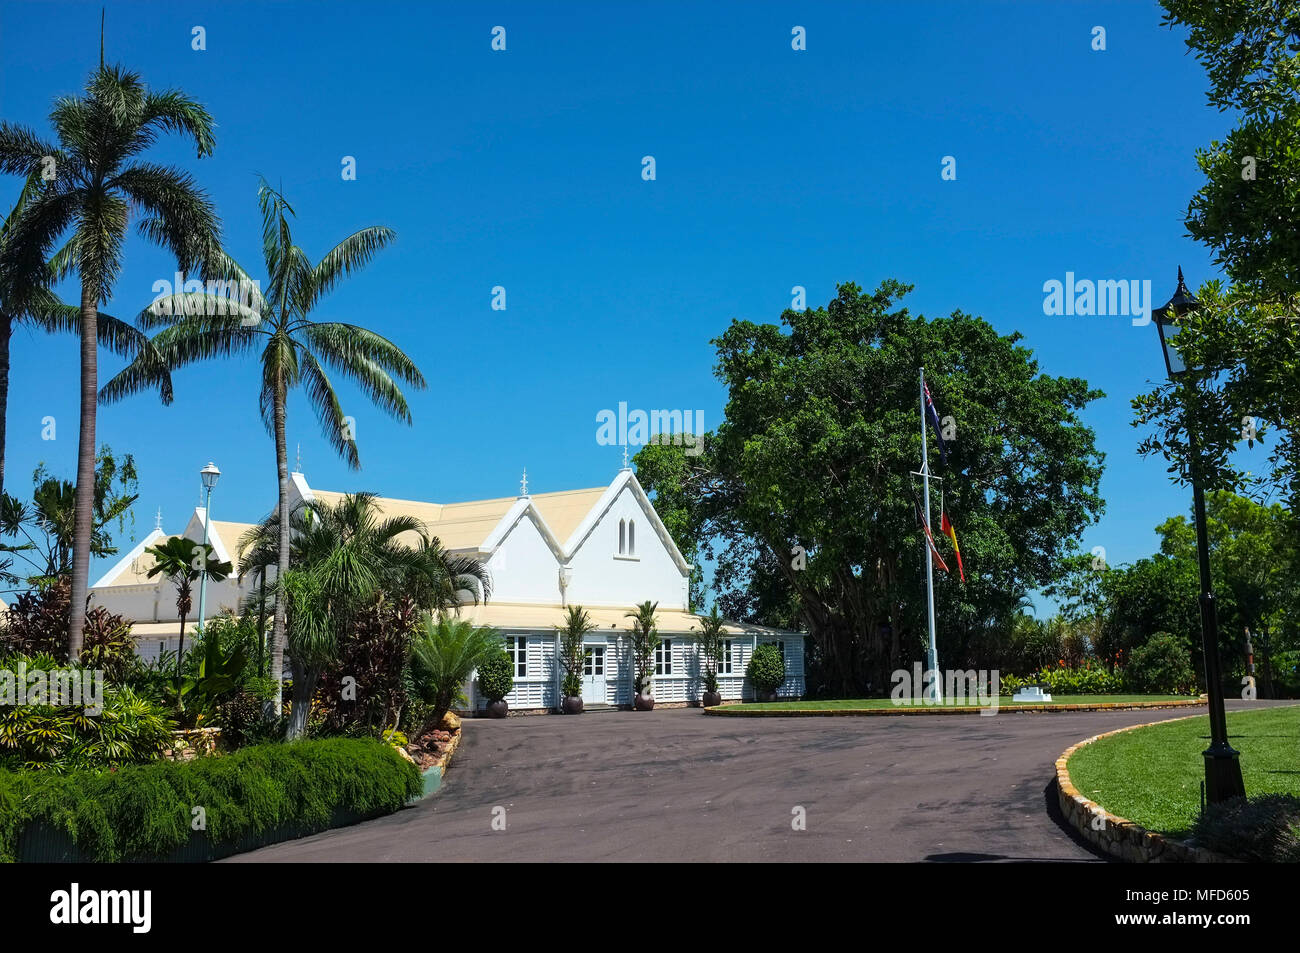 The Northern Territory Government House, in Darwin, Northern Territory, Australia. The house is the residence of the Northern Territory Administrator. Stock Photo